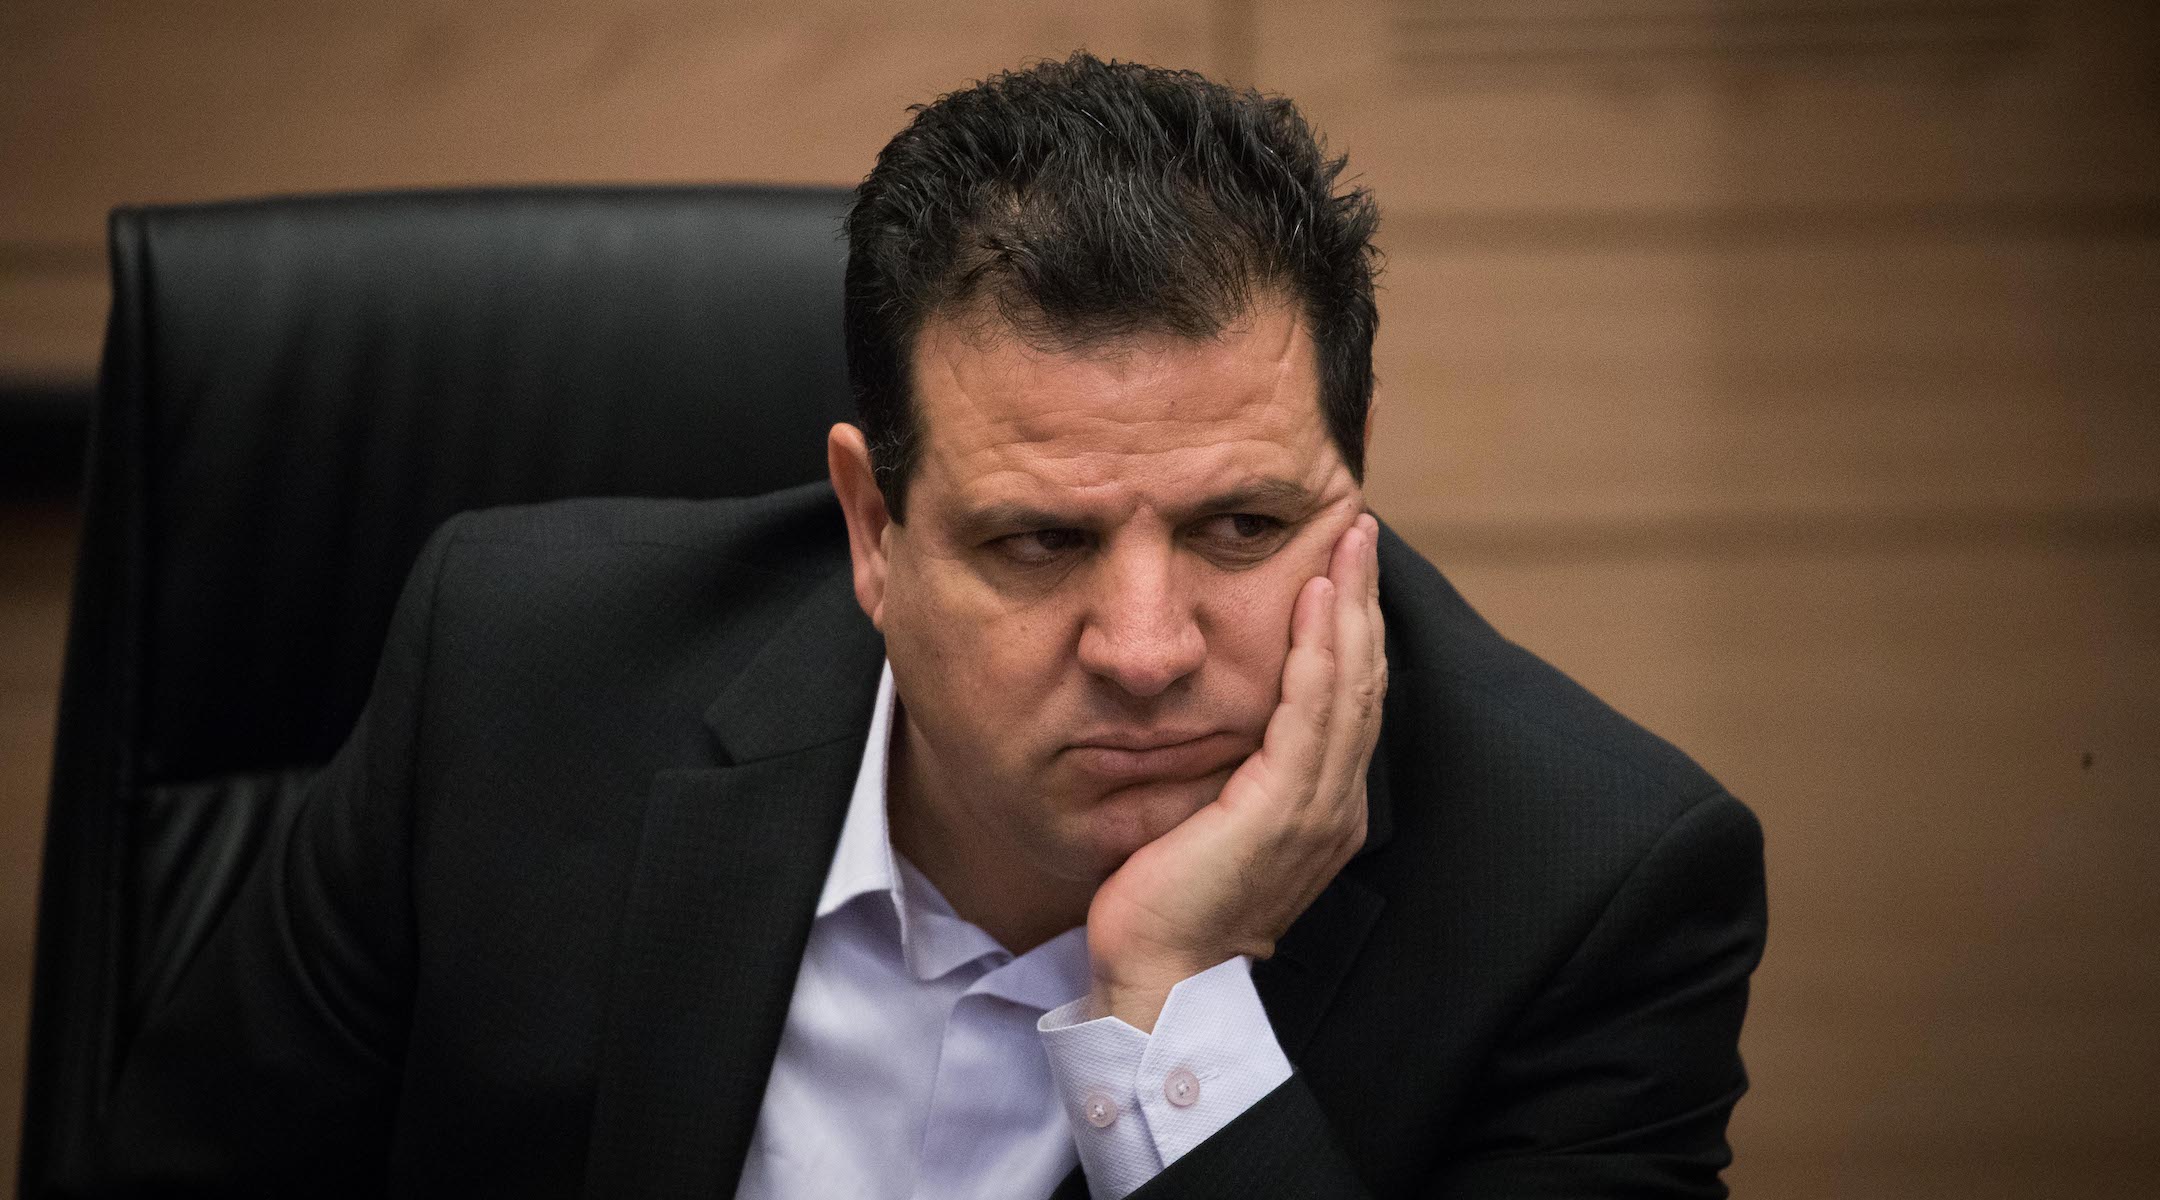 Ayman Odeh, the leader of the Hadash party, attends a Knesset session in Jerusalem, Jan. 1, 2019. (Yonatan Sindel/Flash90)